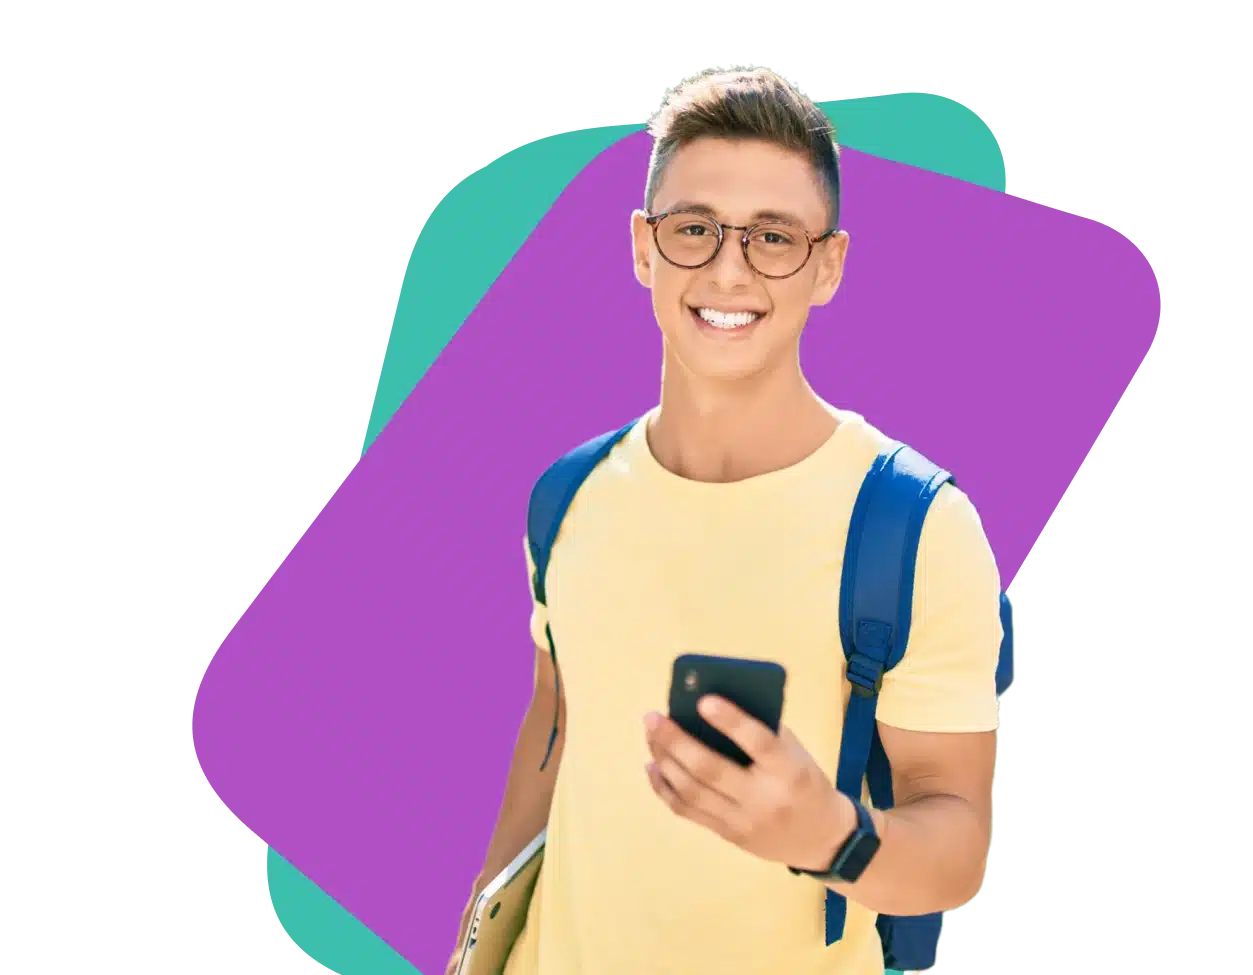 Young adult wearing glasses and a backpack holding a phone